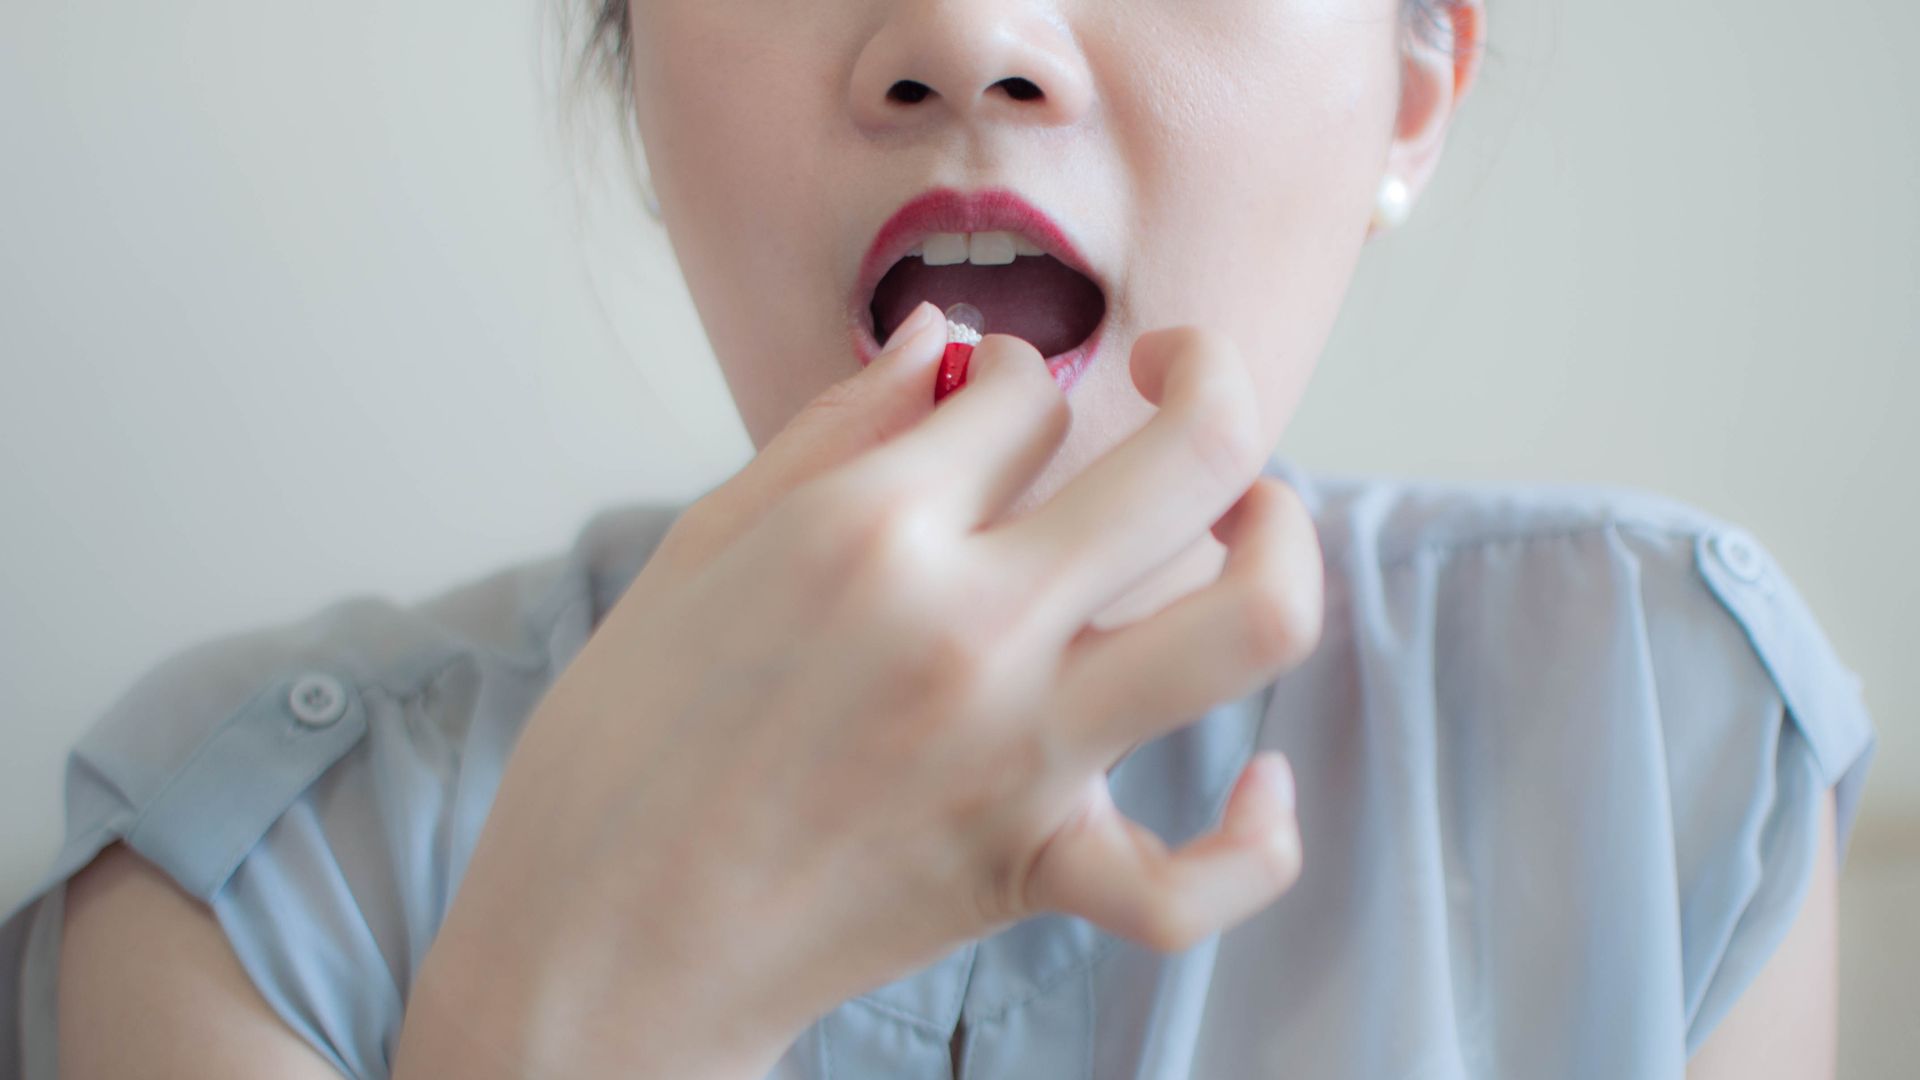 Photo of women swallowing a red and white pill